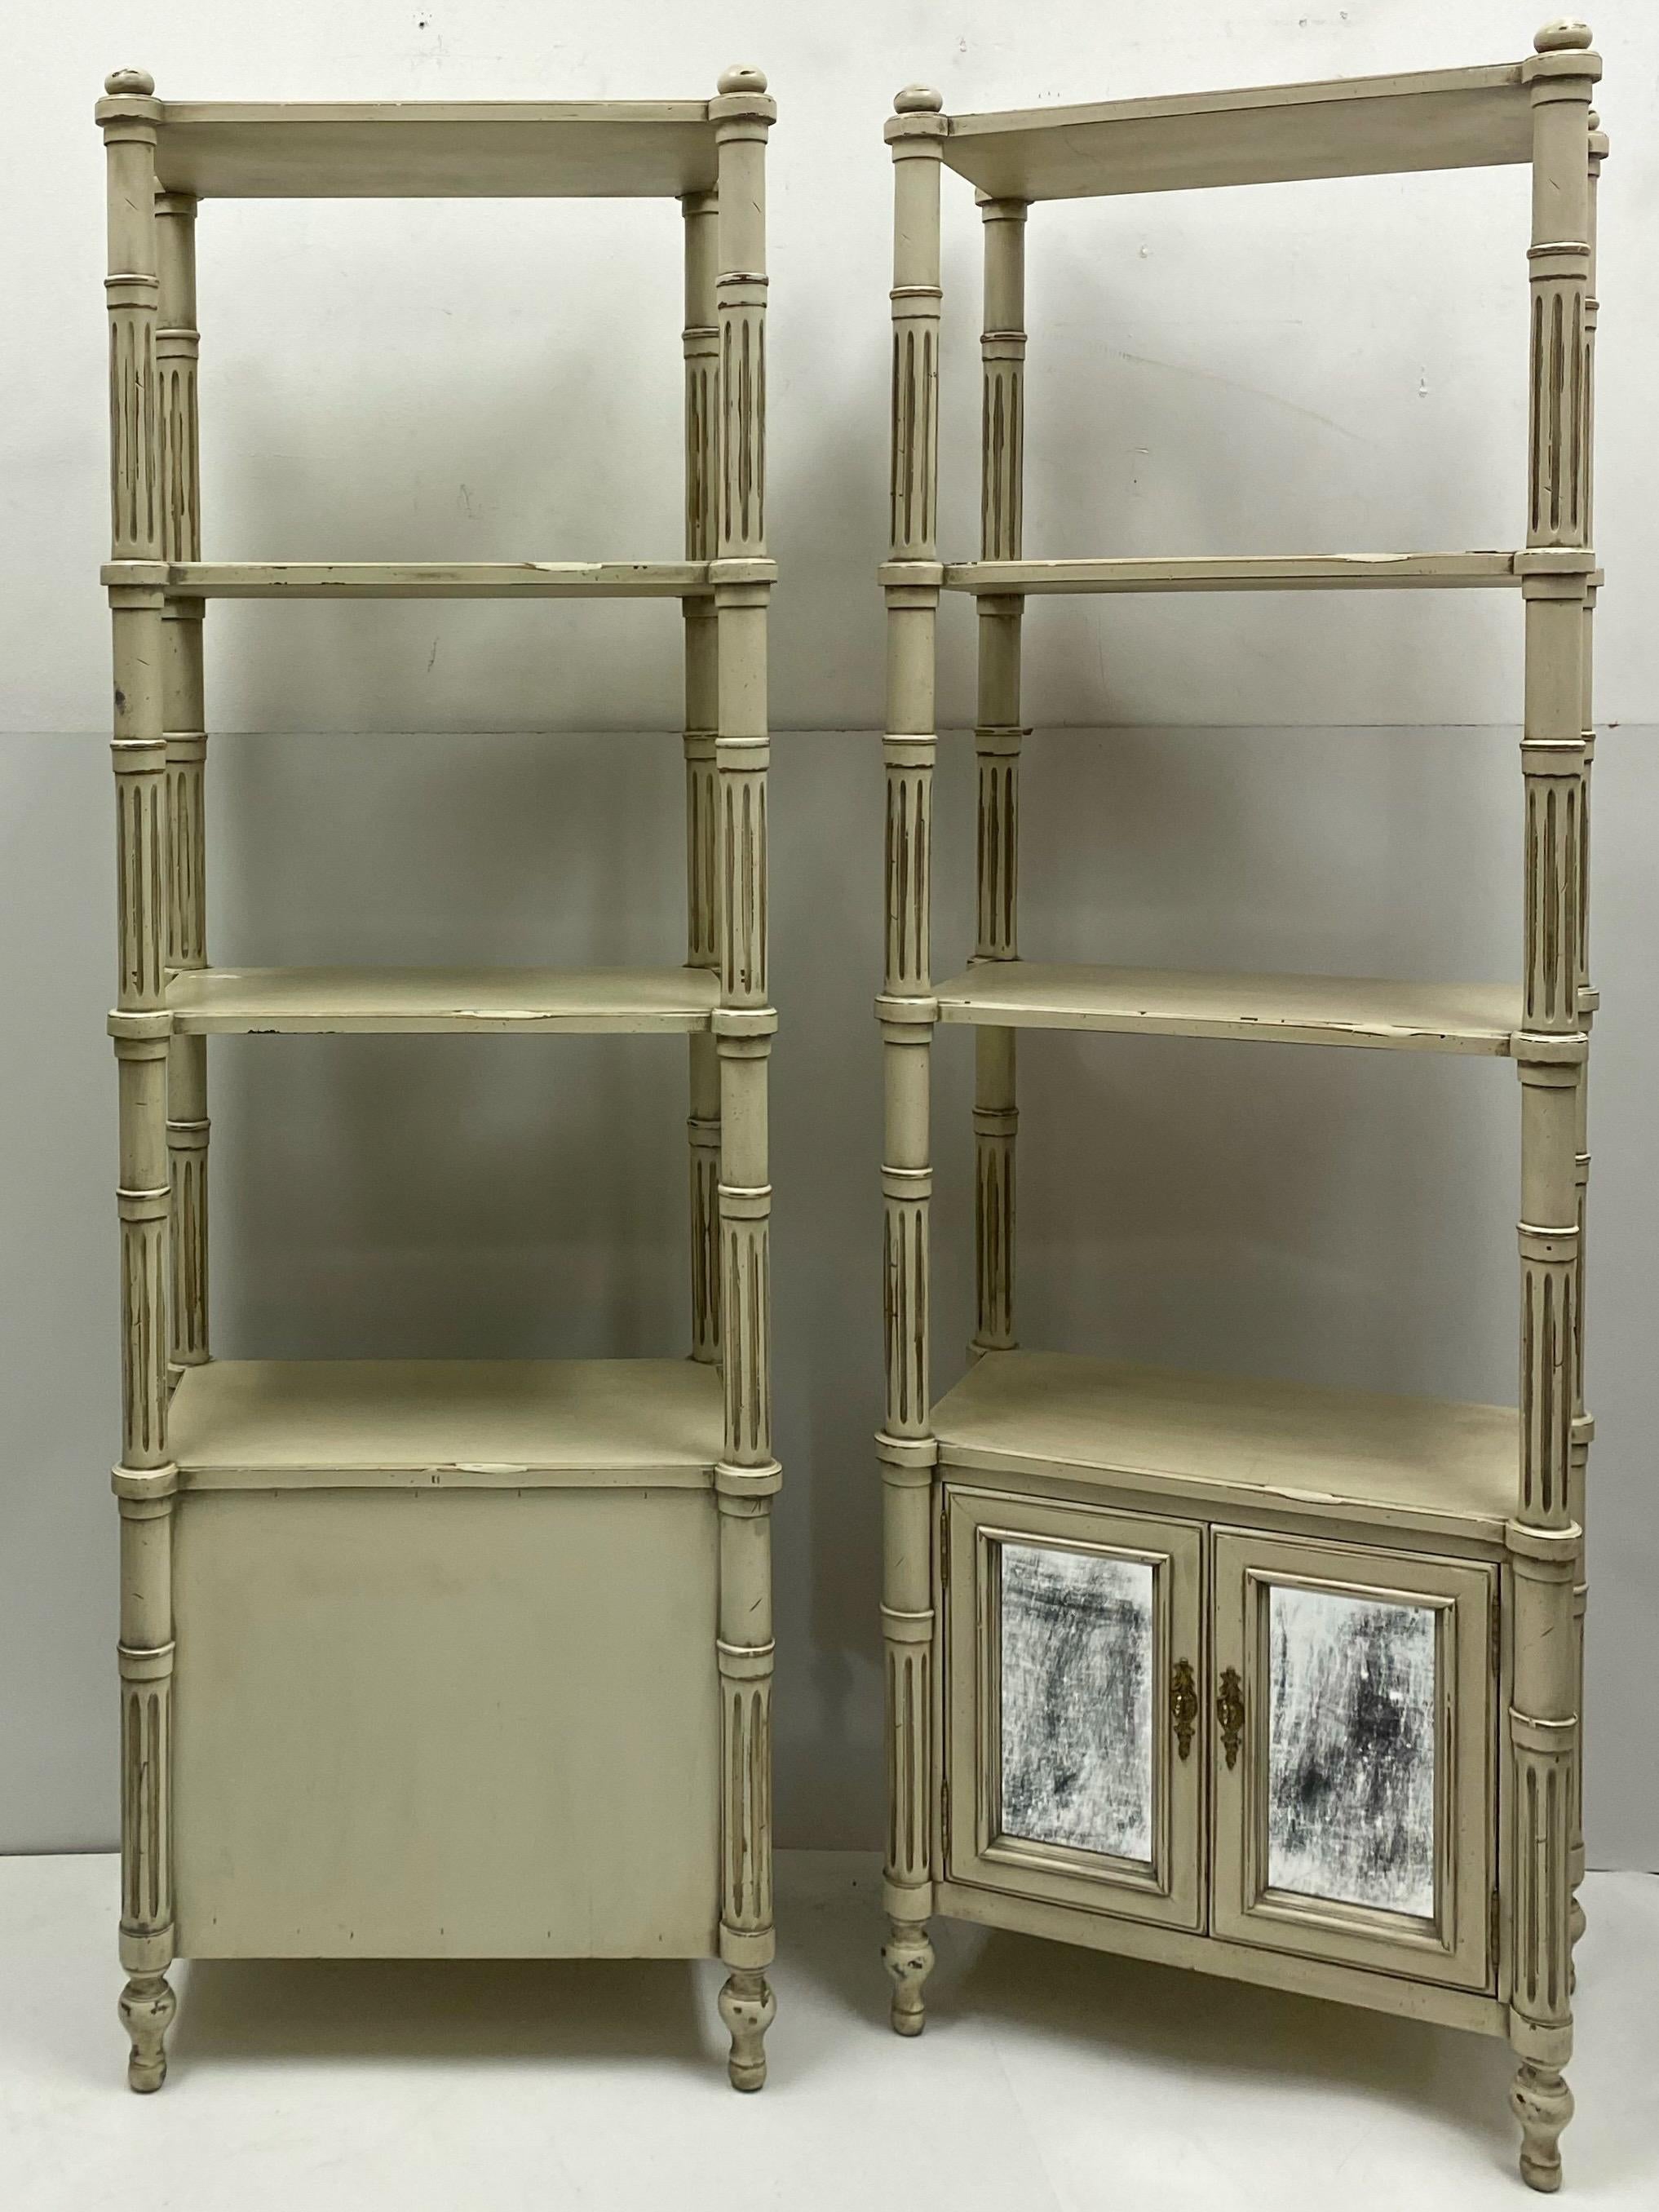 American Late 20th-C. Gustavian or Swedish Style Etageres / Bookshelves / Cabinets, Pair For Sale